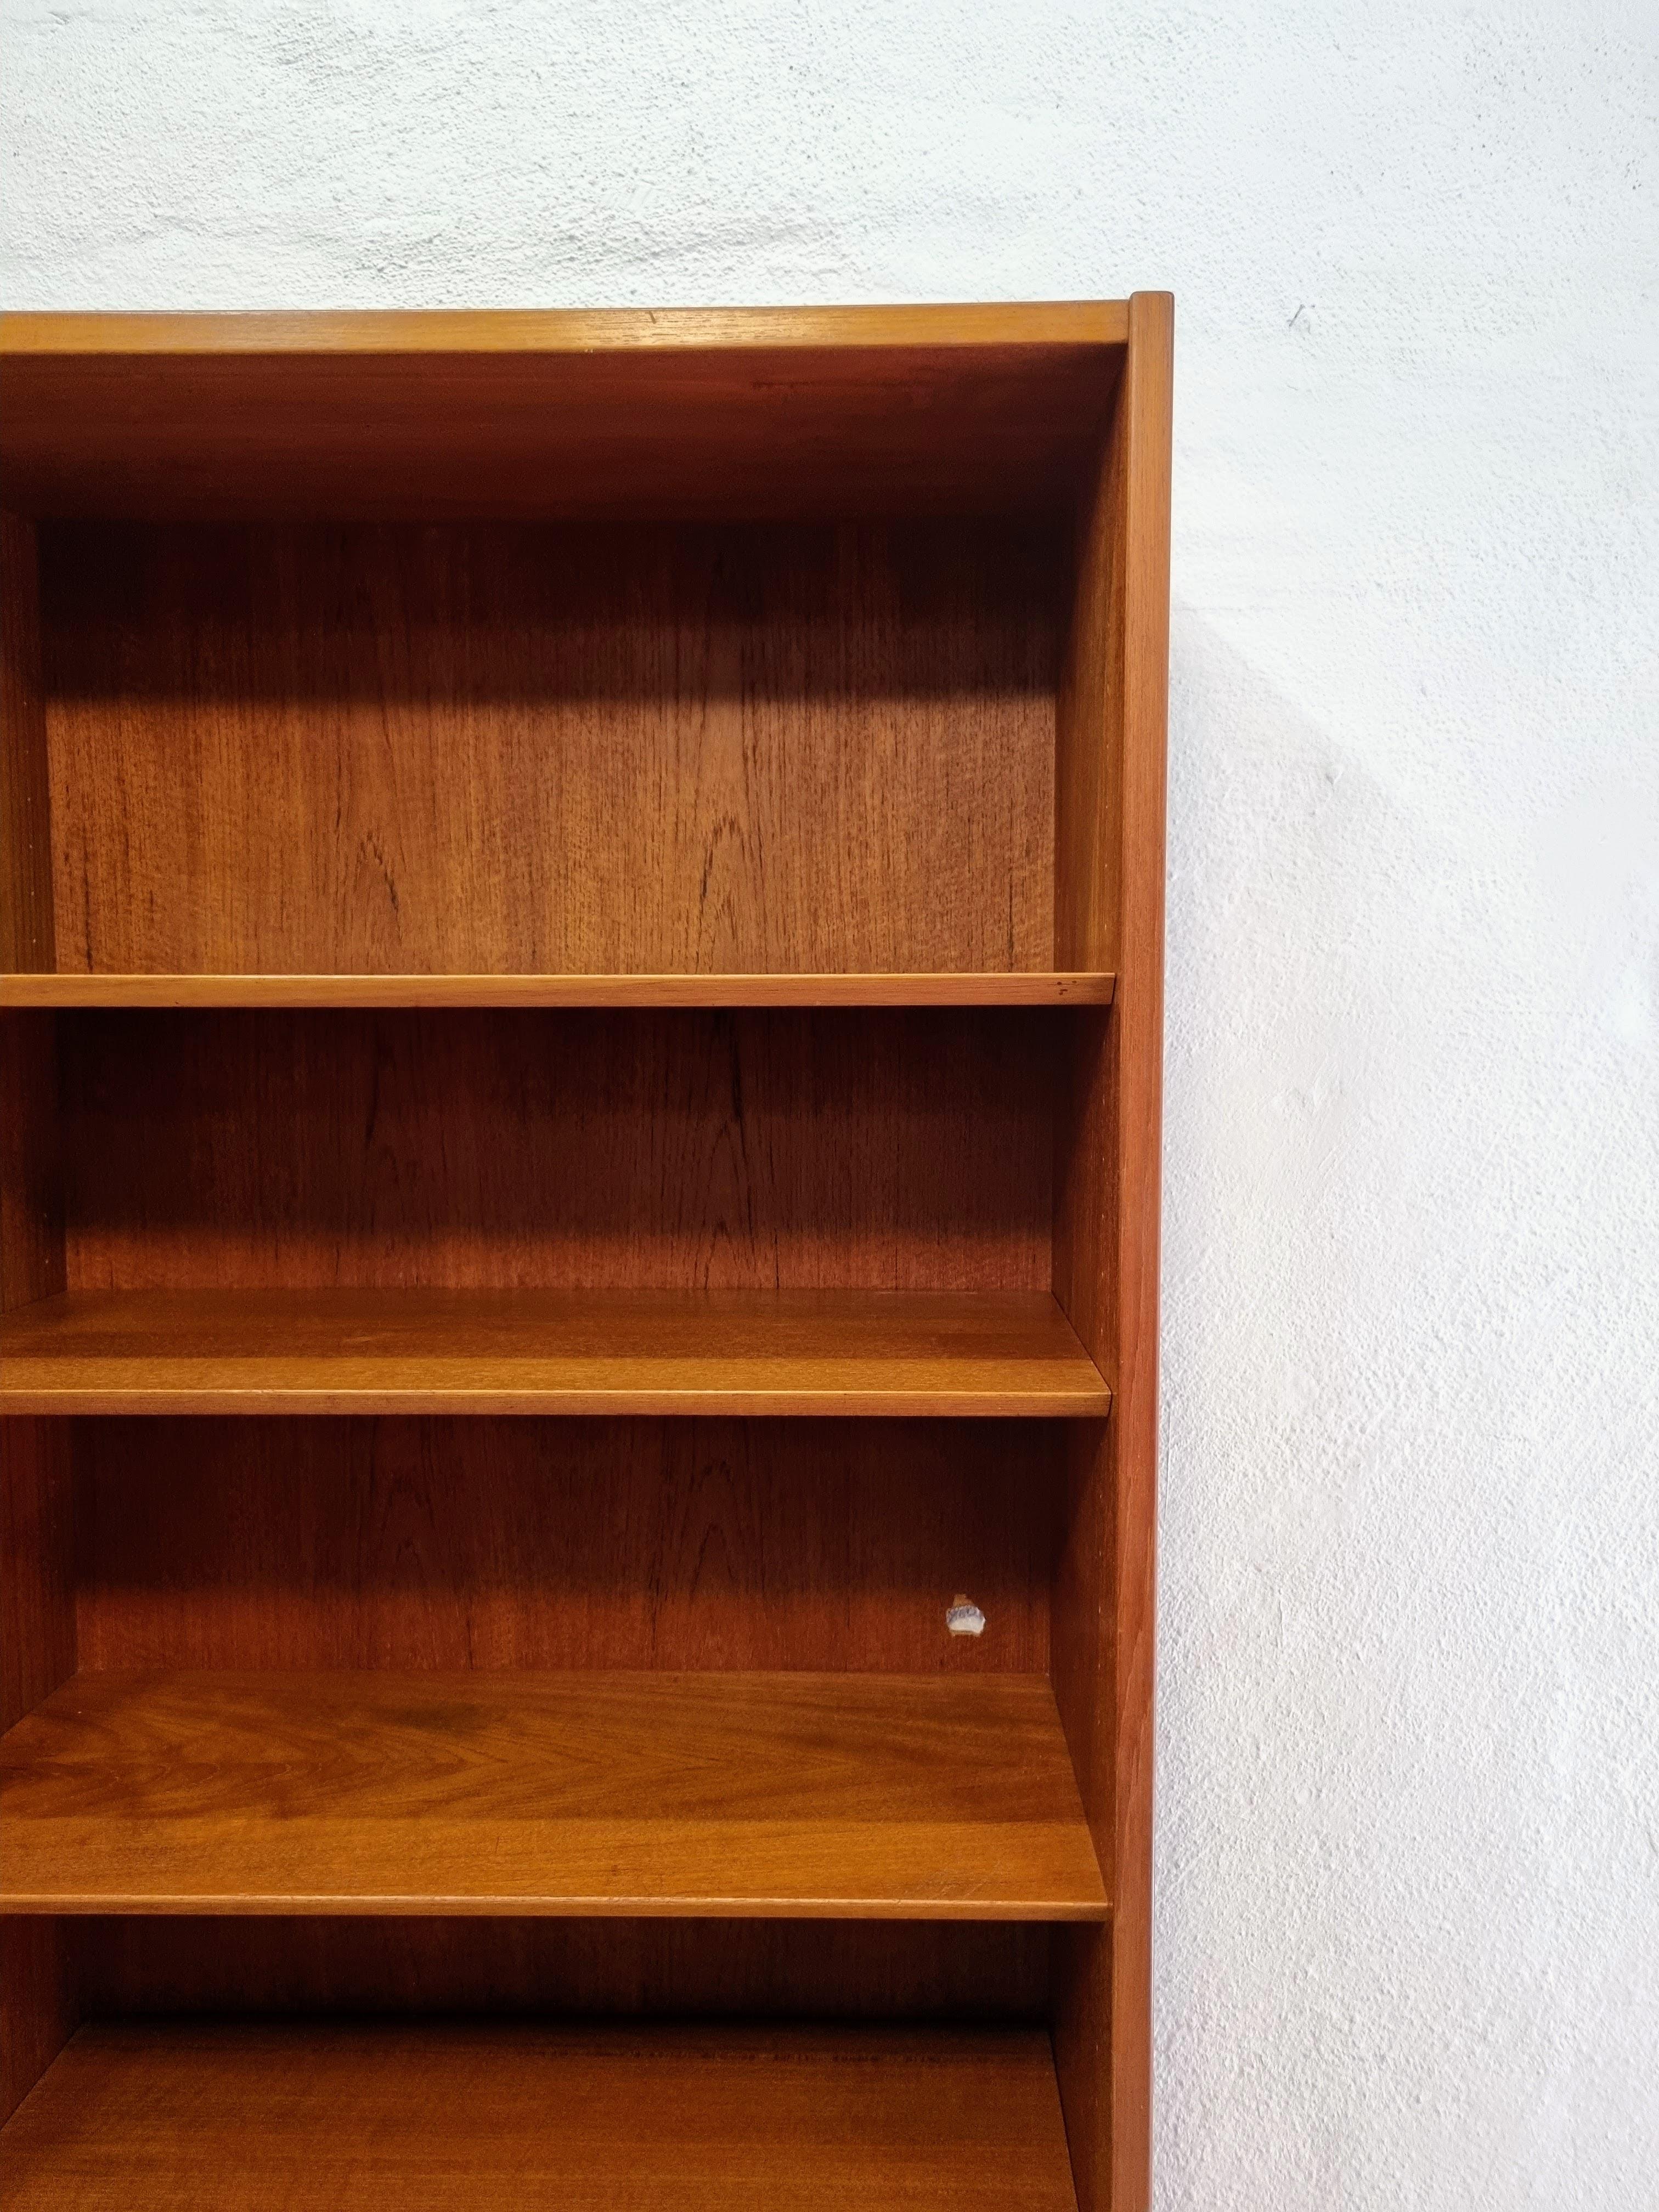 Teak bookcase with height-adjustable shelves.  
This bookcase is manufactured by the Danish furniture factory Hundevad & Co.  The bookcase is beautifully made and made of good materials.  
Apart from the Hundevad stamp on the back, of course, the